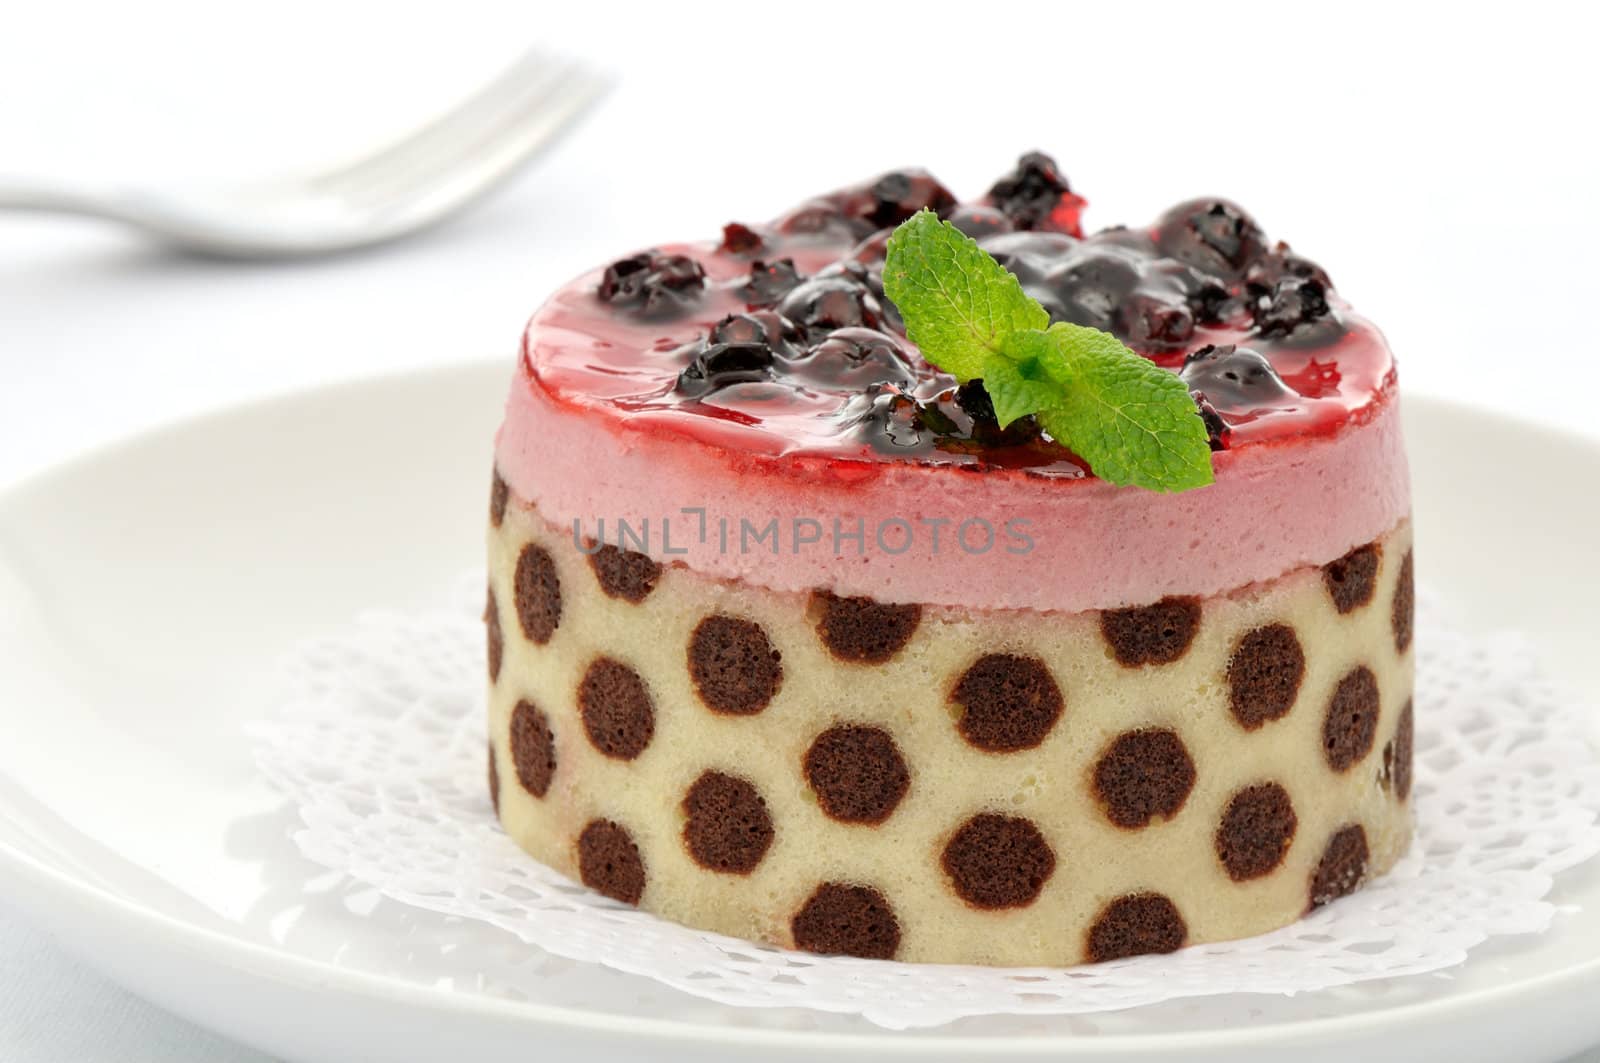 Raspberry mousse cake decorated with blueberries and mint leaves on a white plate